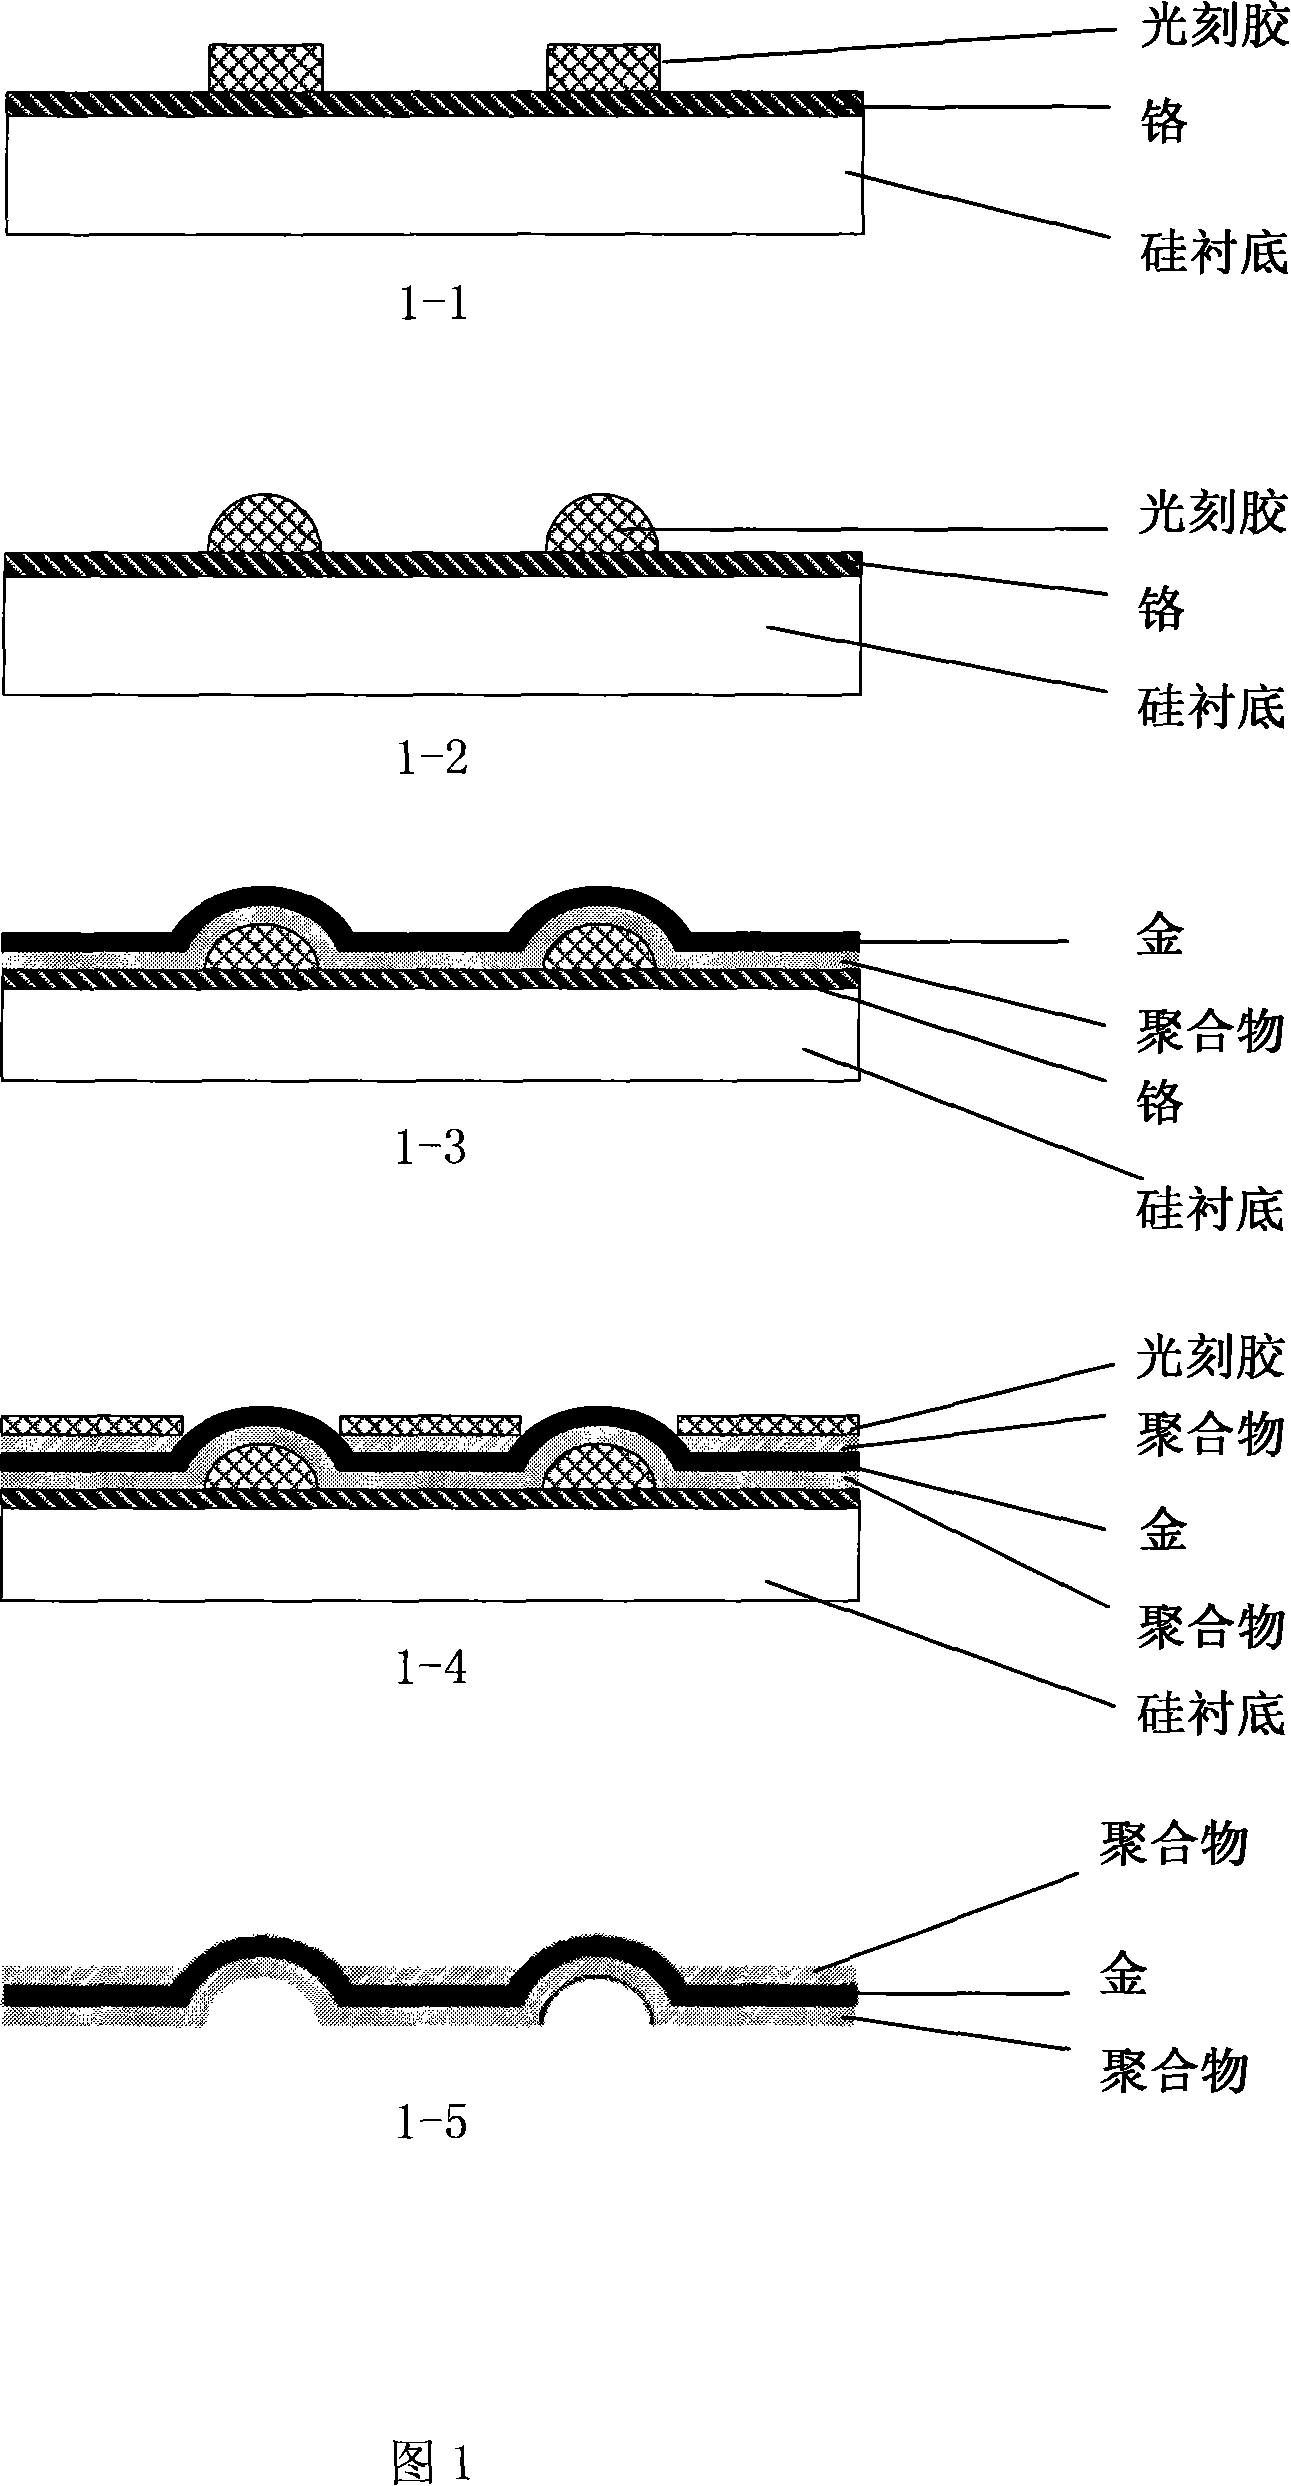 Method for preparing ball-shaped bump biological microelectrode array